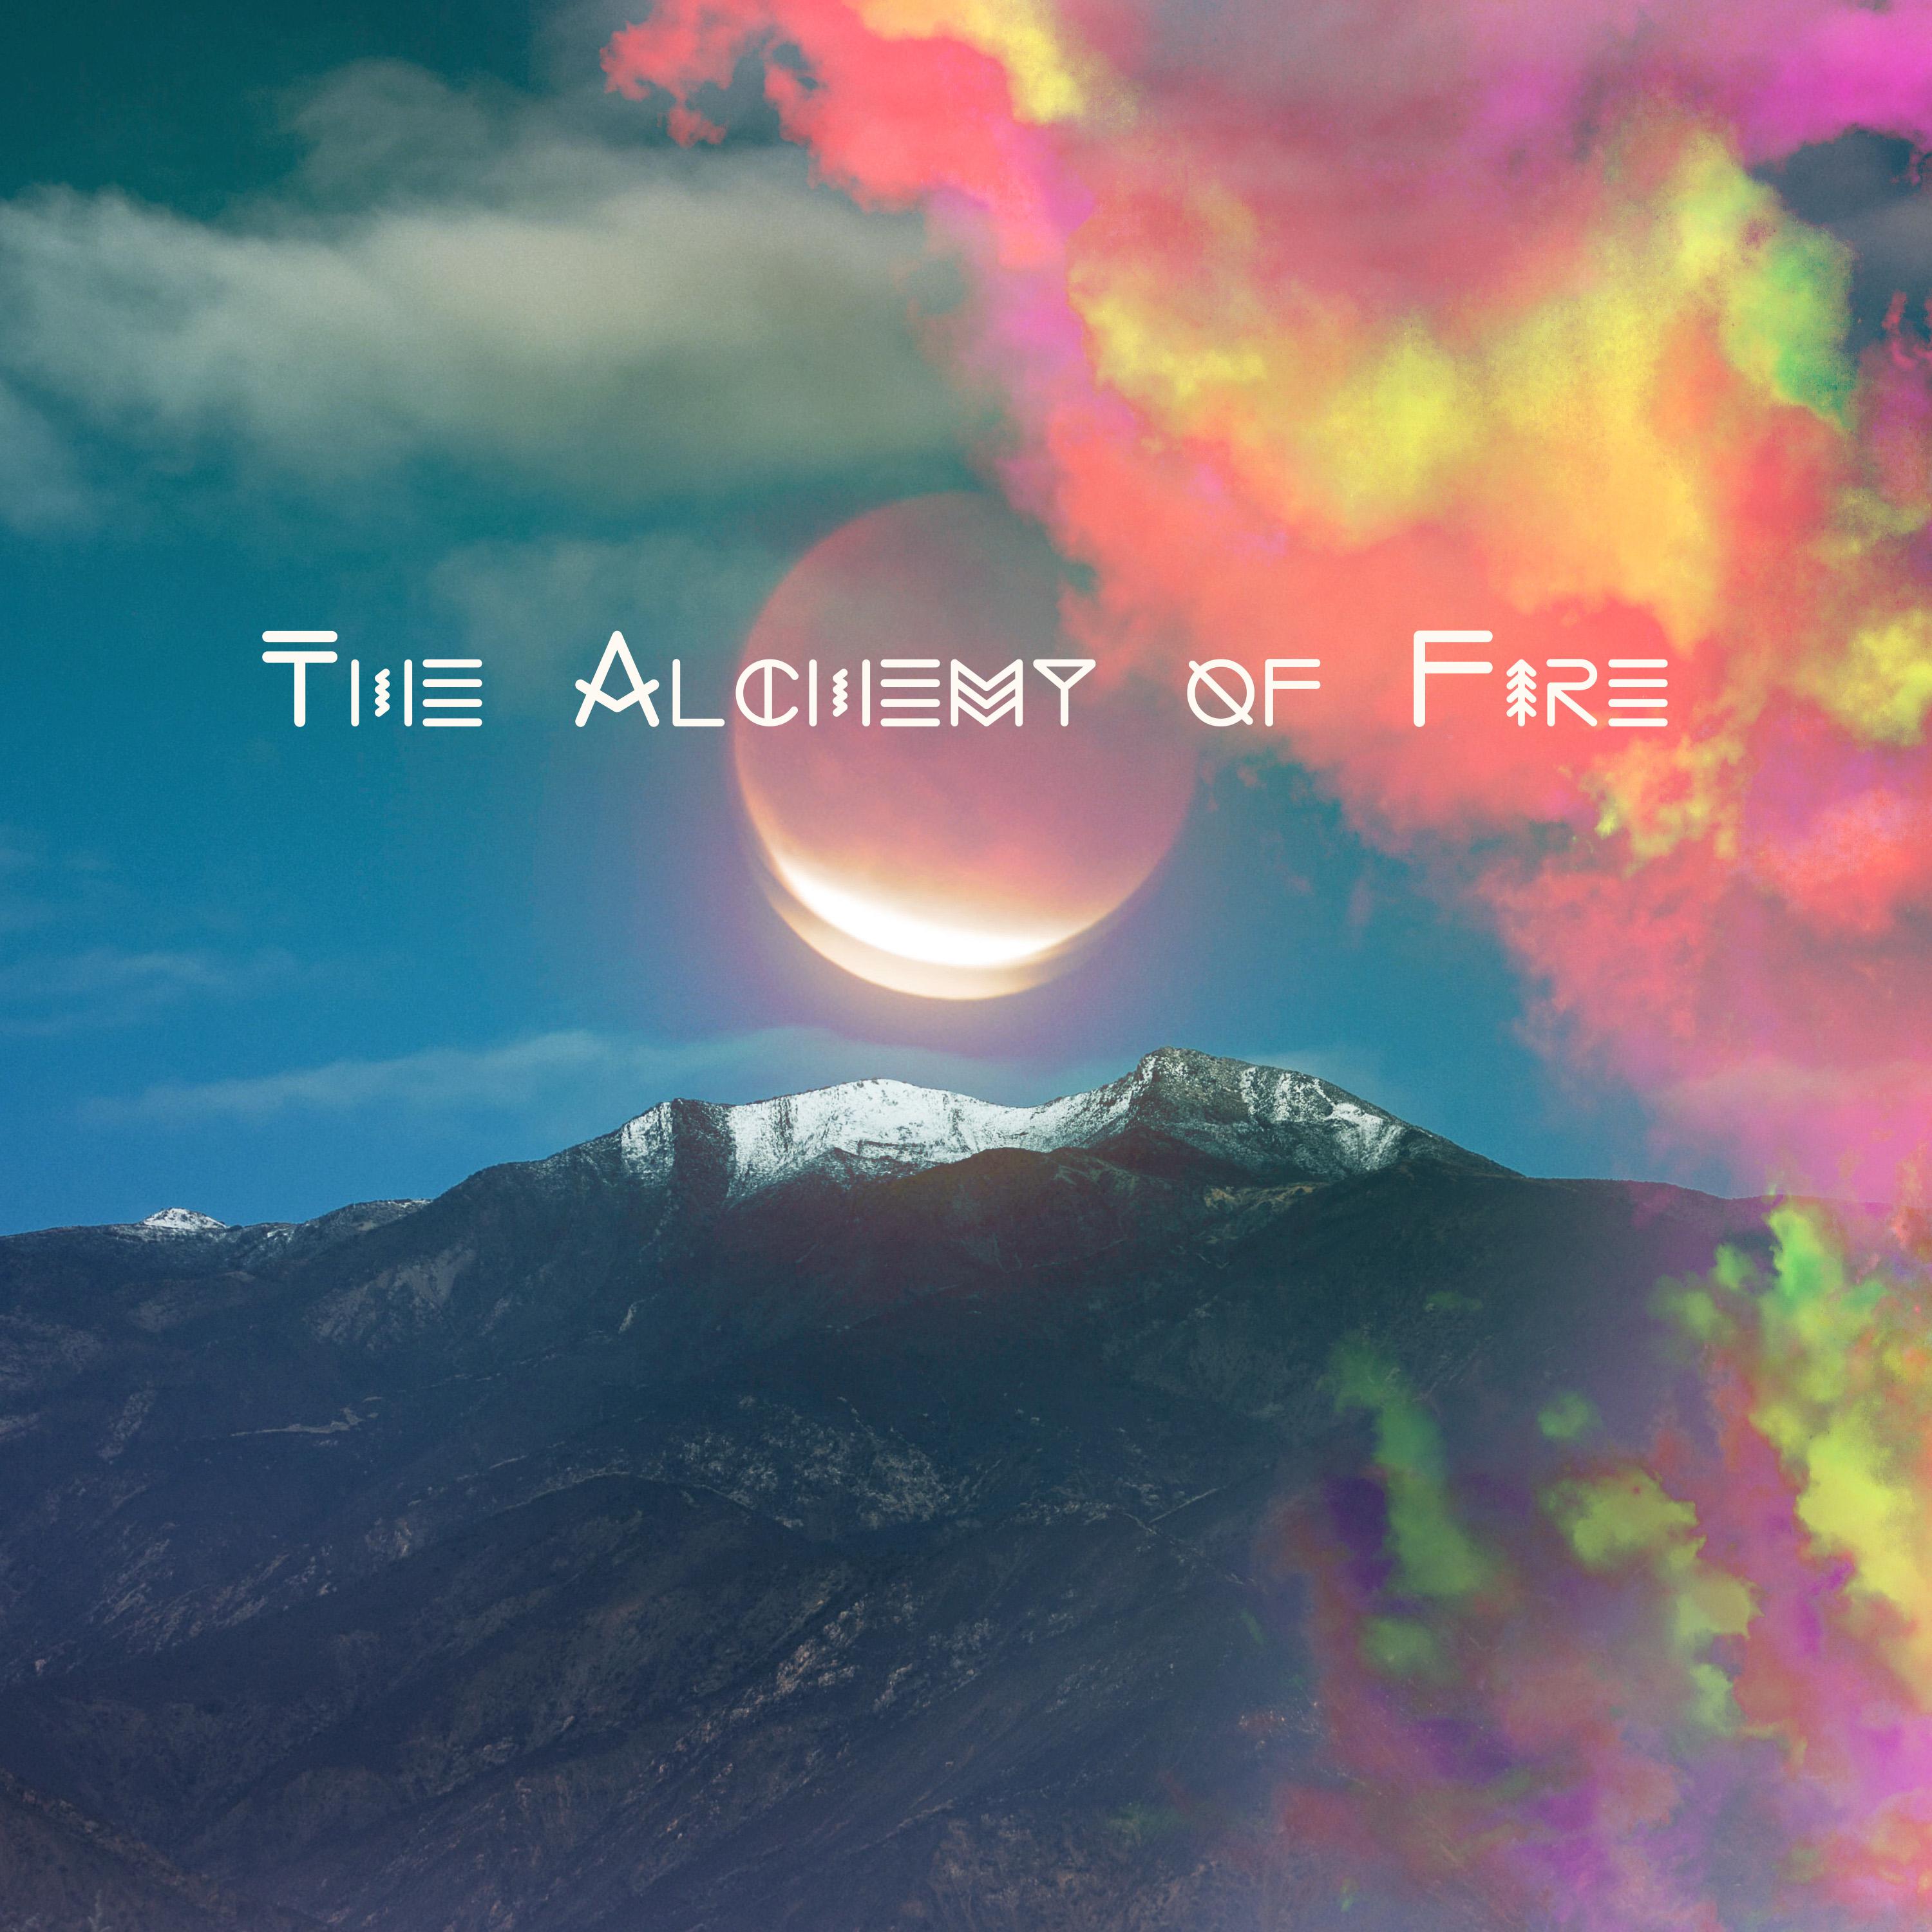 Helpful Humans Presents: The Alchemy of Fire - Songs to Benefit The Ojai Valley